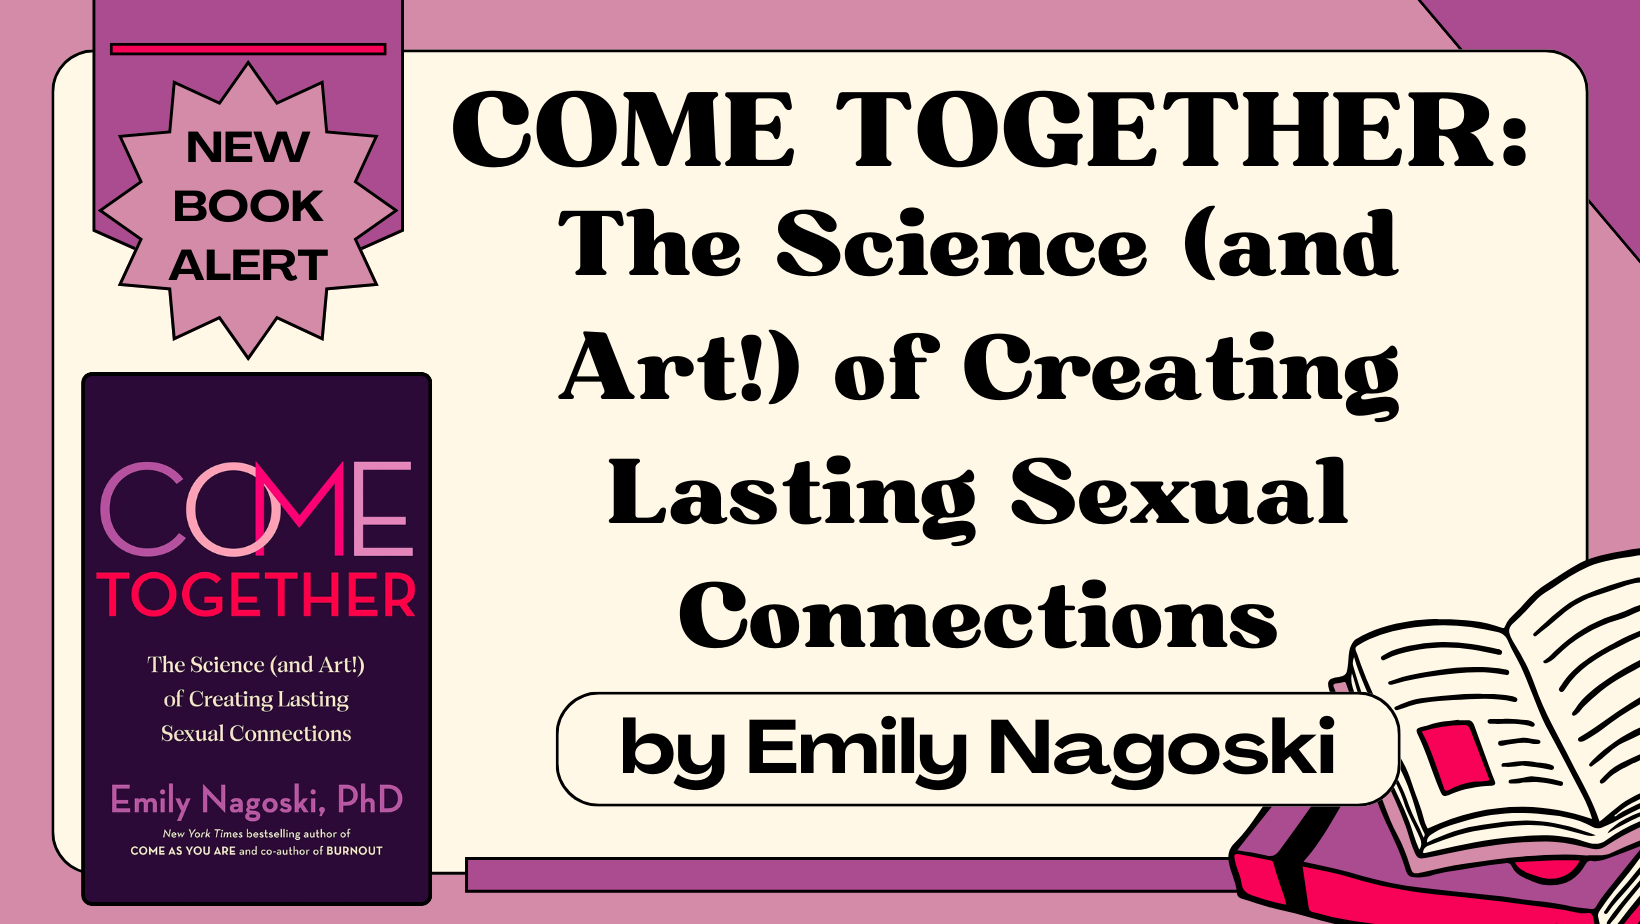 New Sex Book Alert: Come Together by Emily Nagoski